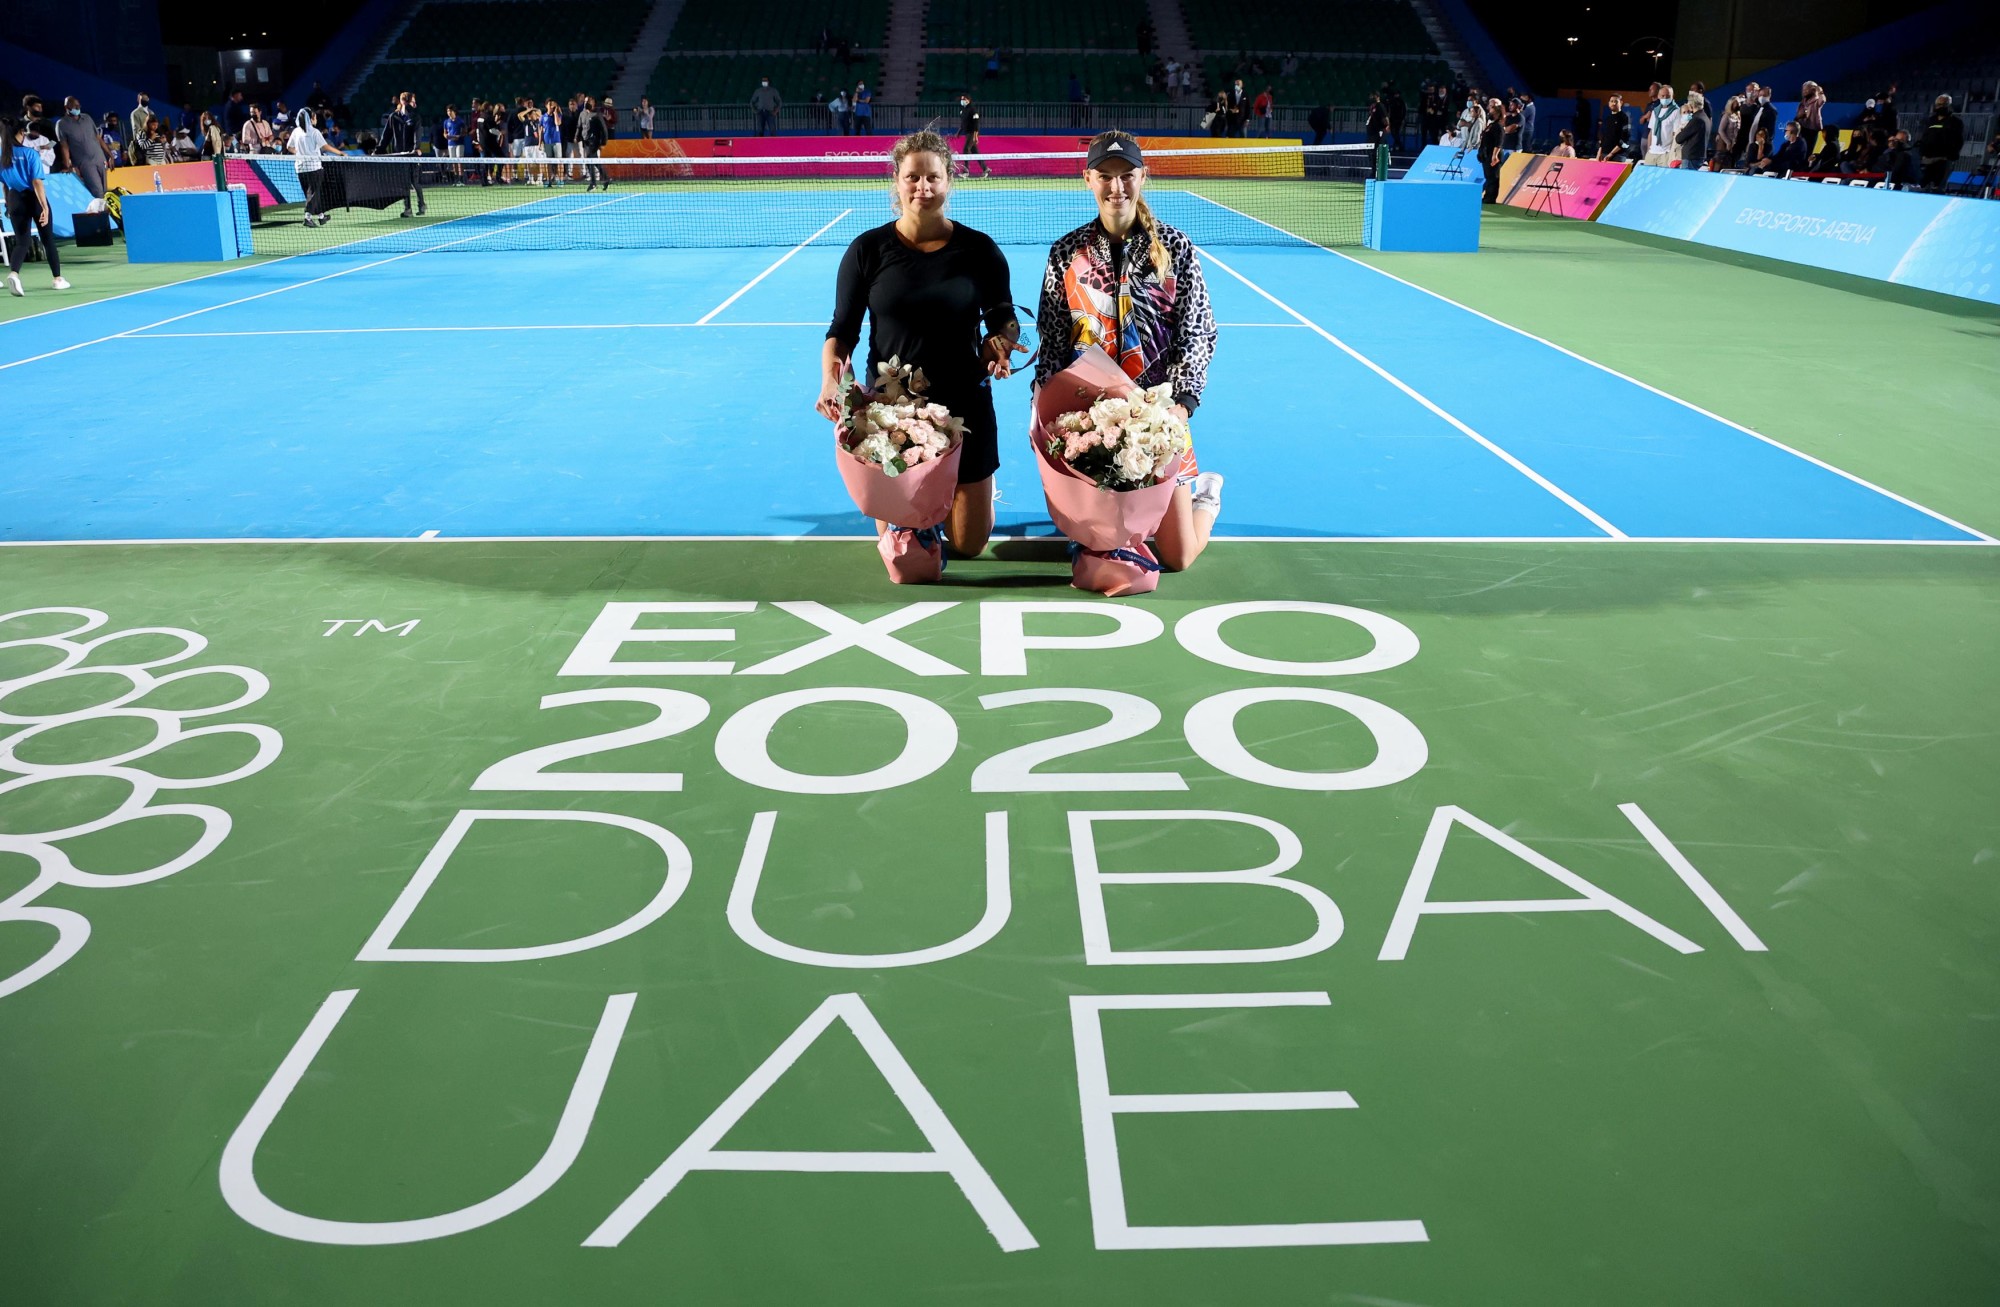 Tennis legends and Women’s Singles Exhibition Game winner Kim Clijsters (L) and runner up Caroline Wozniacki during Expo 2020 Dubai Tennis Week at the Expo Sports Arena m52494